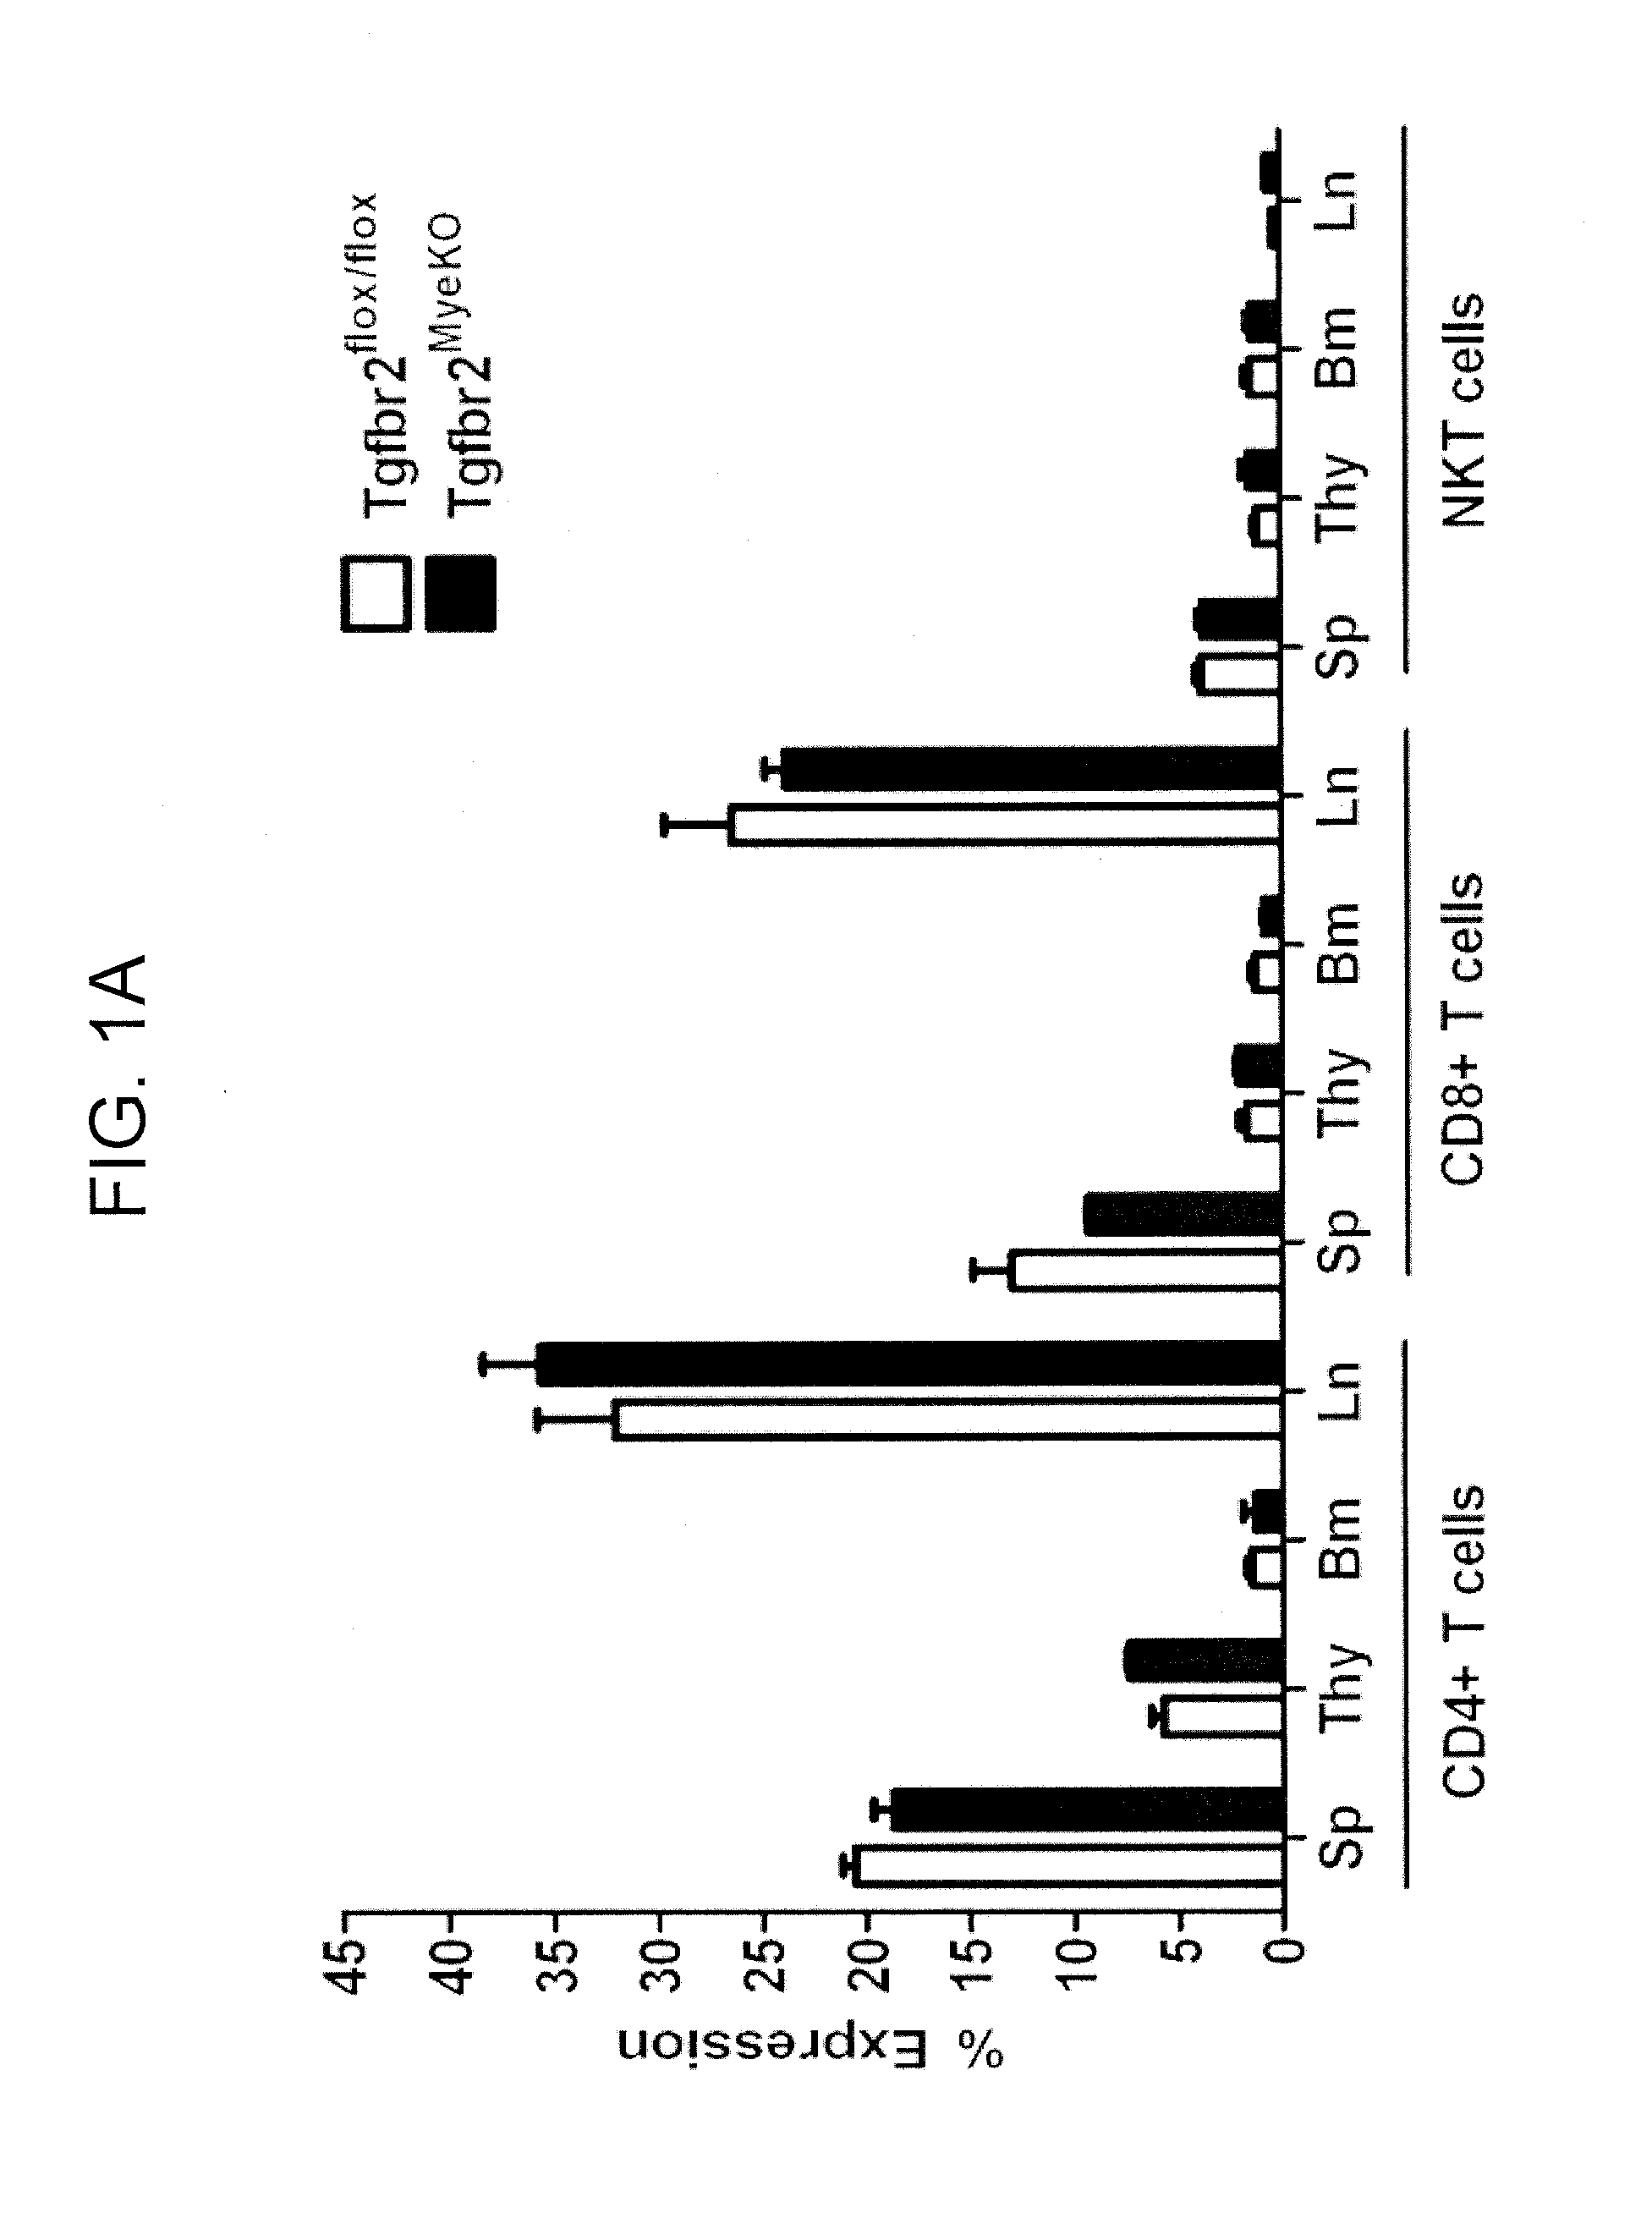 Reduction of tgf beta signaling in myeloid cells in the treatment of cancer